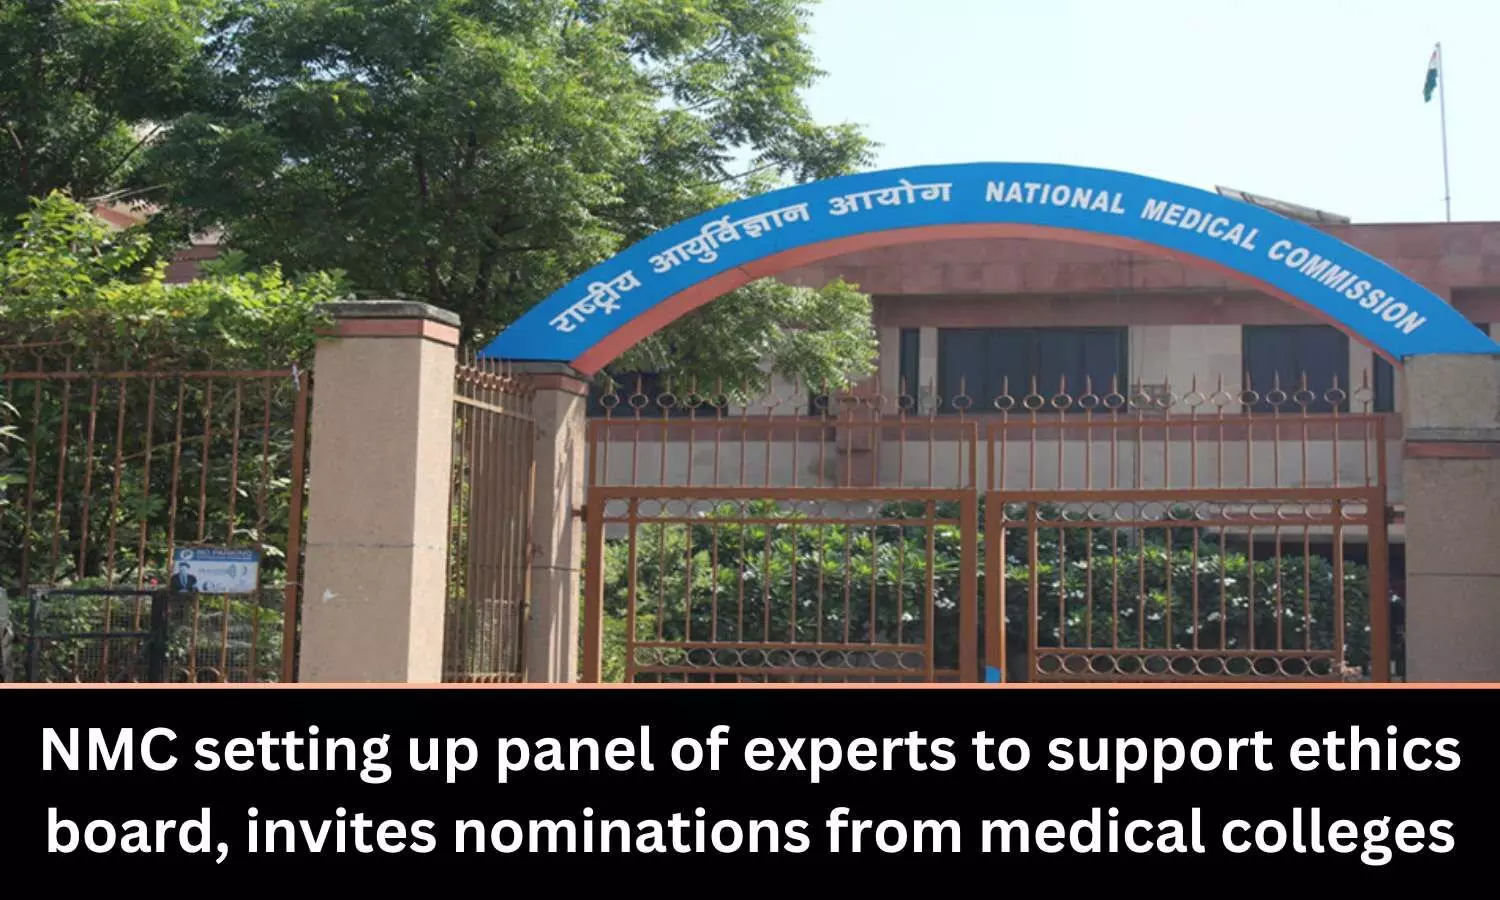 NMC setting up panel of experts to support ethics board, invites nominations from medical colleges